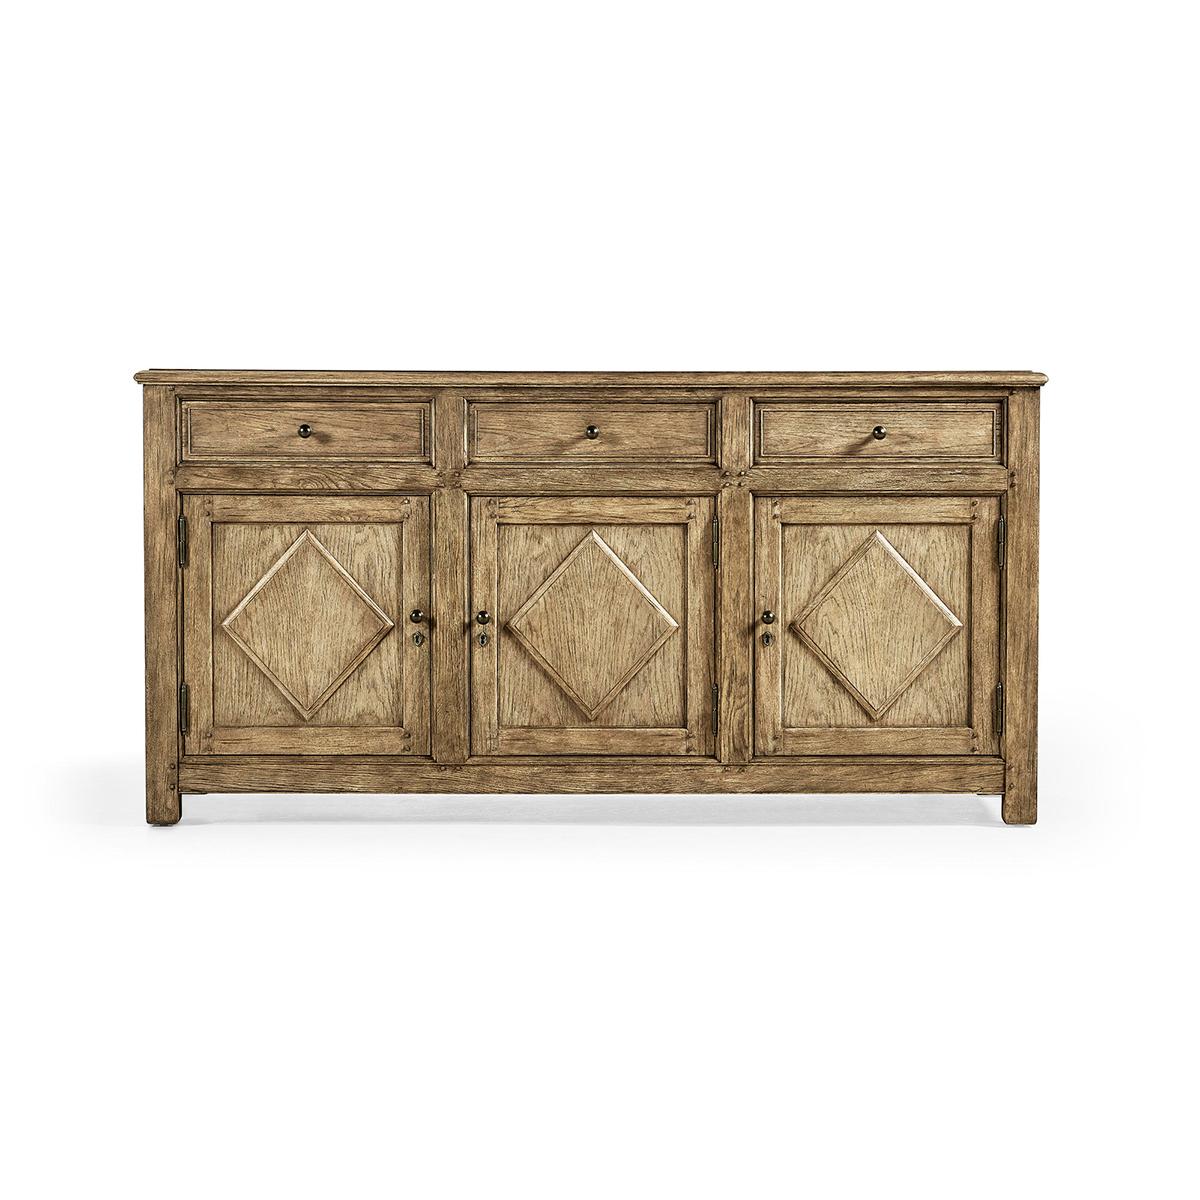 A masterpiece of traditional craftsmanship that blends luxurious design with structural perfection. Crafted from solid oak with chestnut veneers, this sideboard is finished in an alluring Stripped Brown Chestnut that radiates warmth and